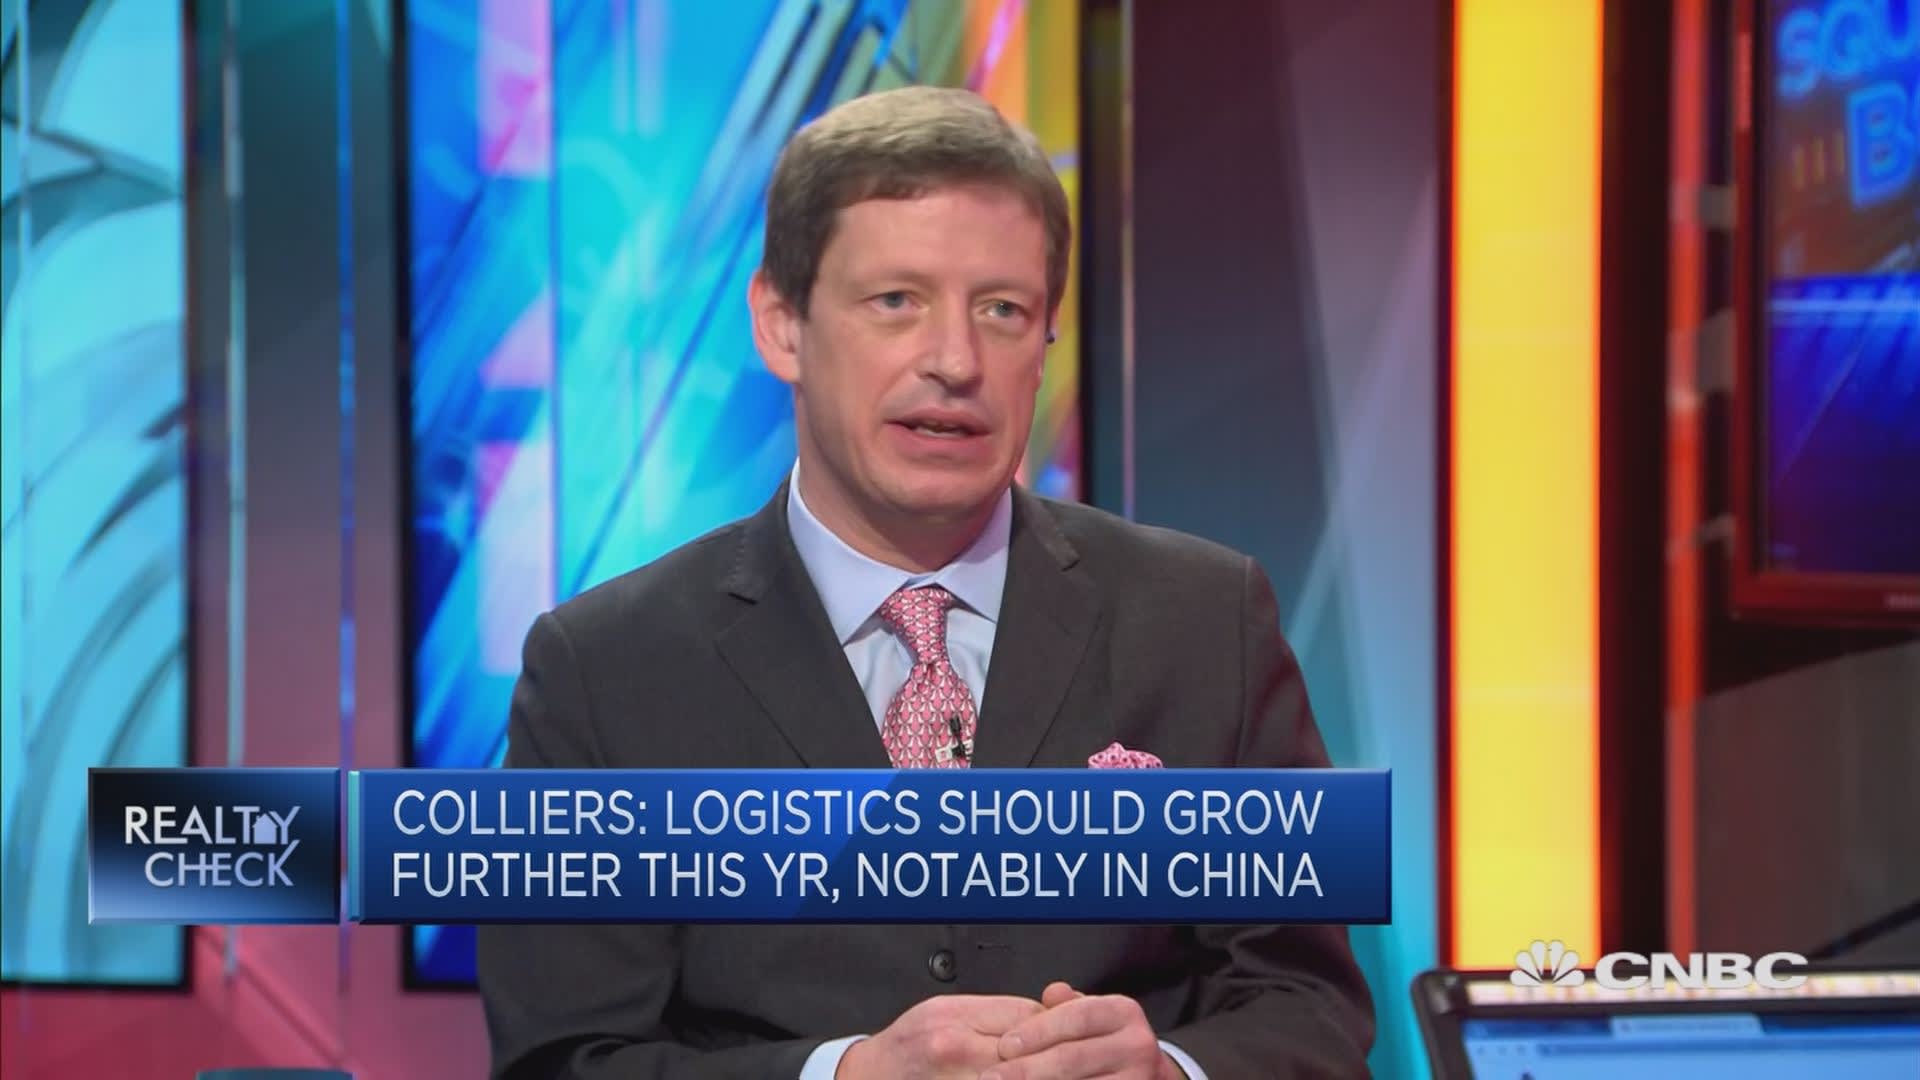 The logistics market is 'very strong' across Asia: Colliers